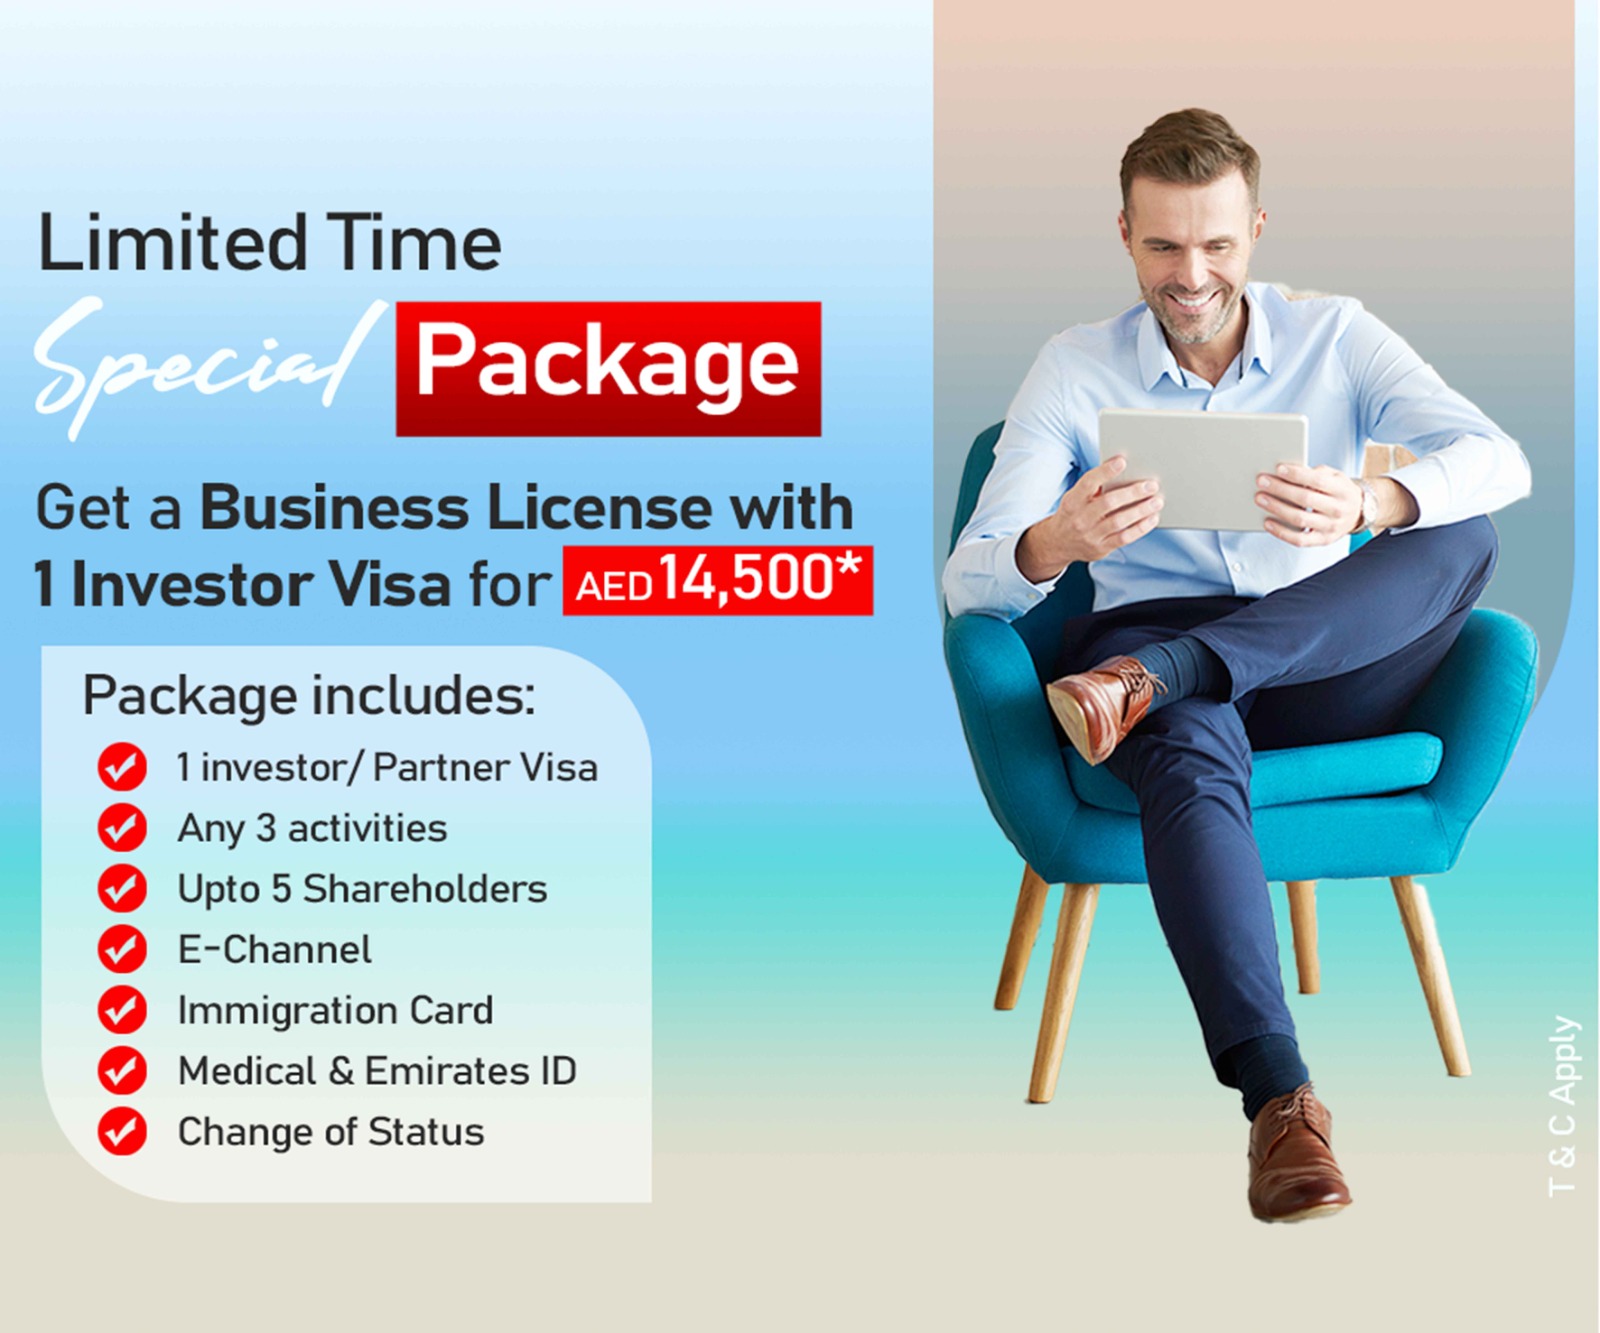 SPC free zone license limited offer